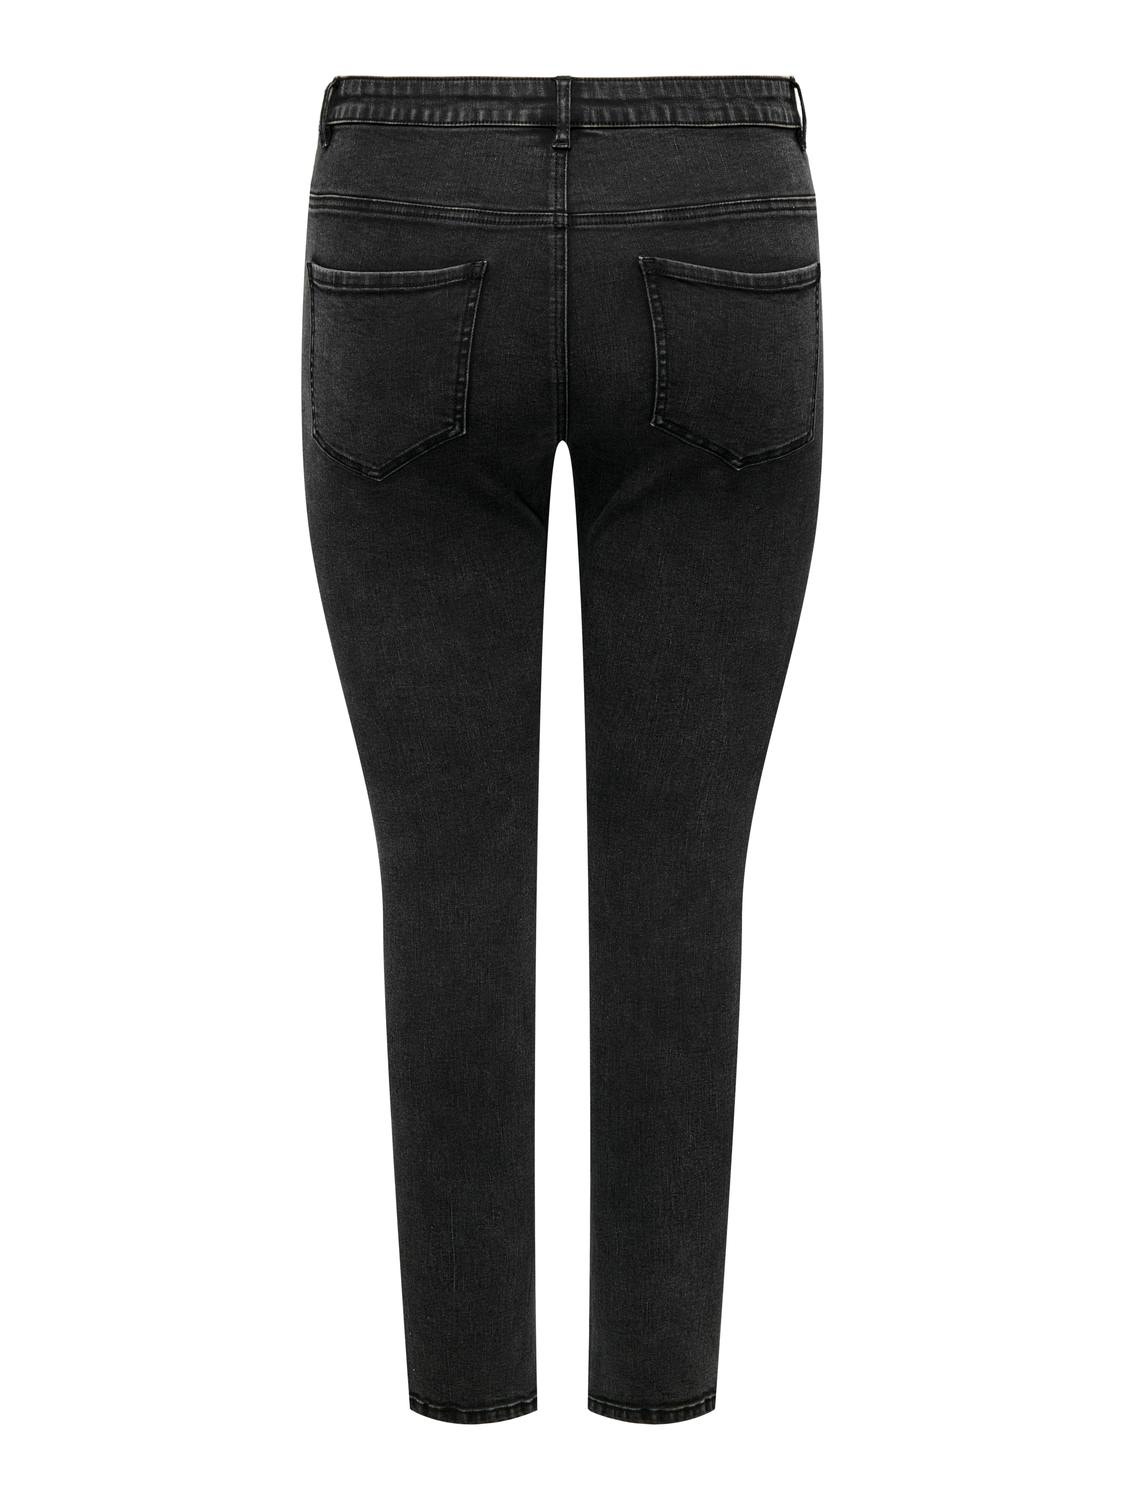 ONLY Skinny Fit Hohe Taille Jeans -Washed Black - 15308803